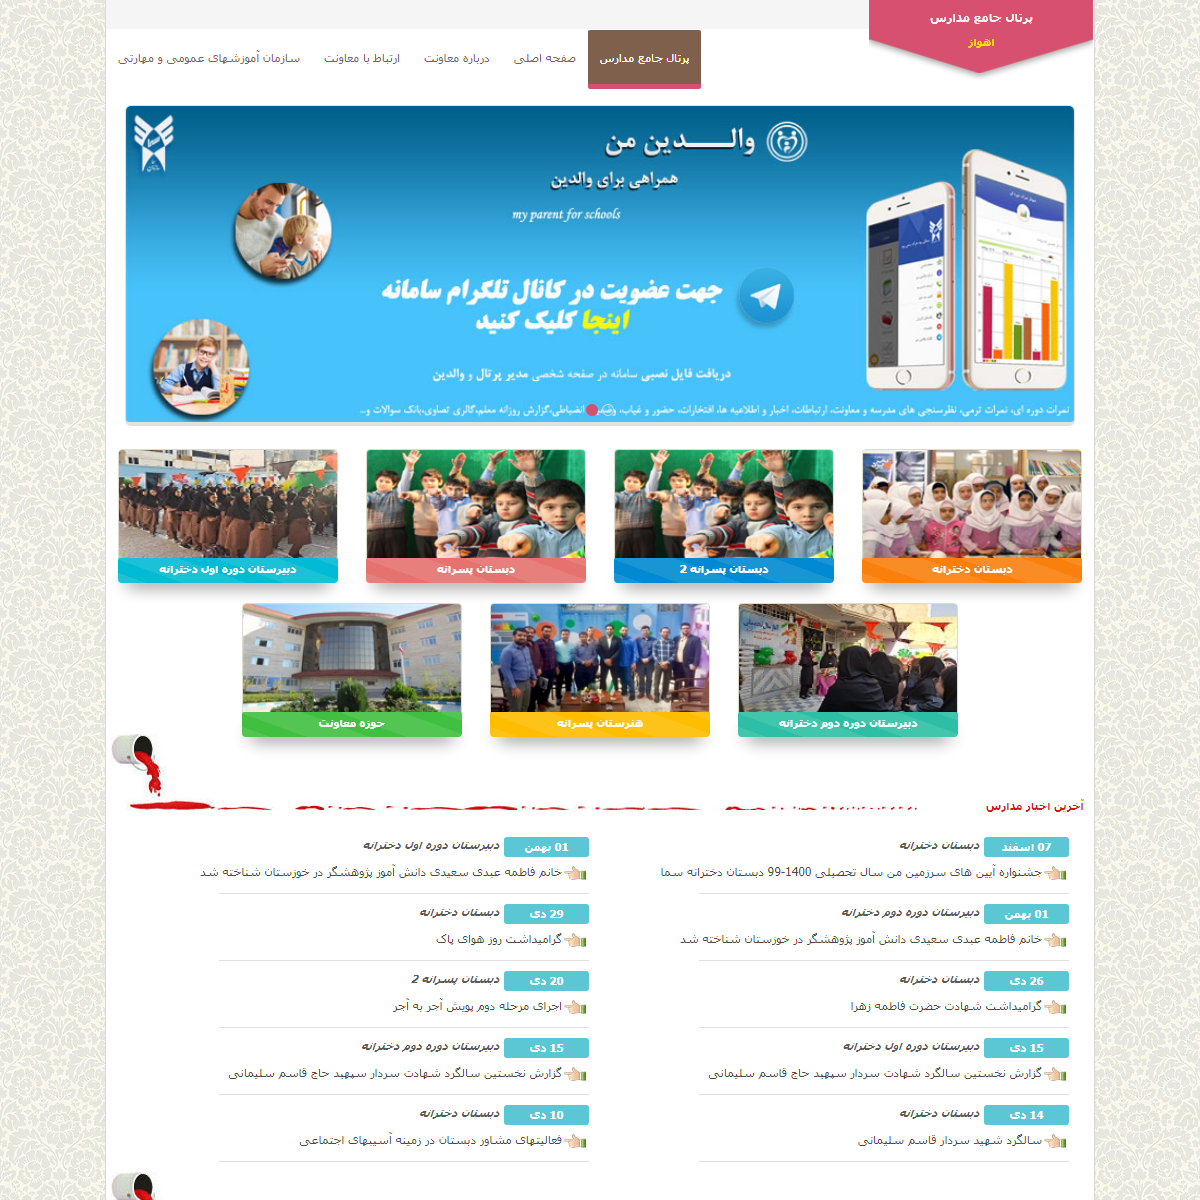 A complete backup of http://ahvaz.samaschools.ir/HomePage/HomeFiftyNine.aspx